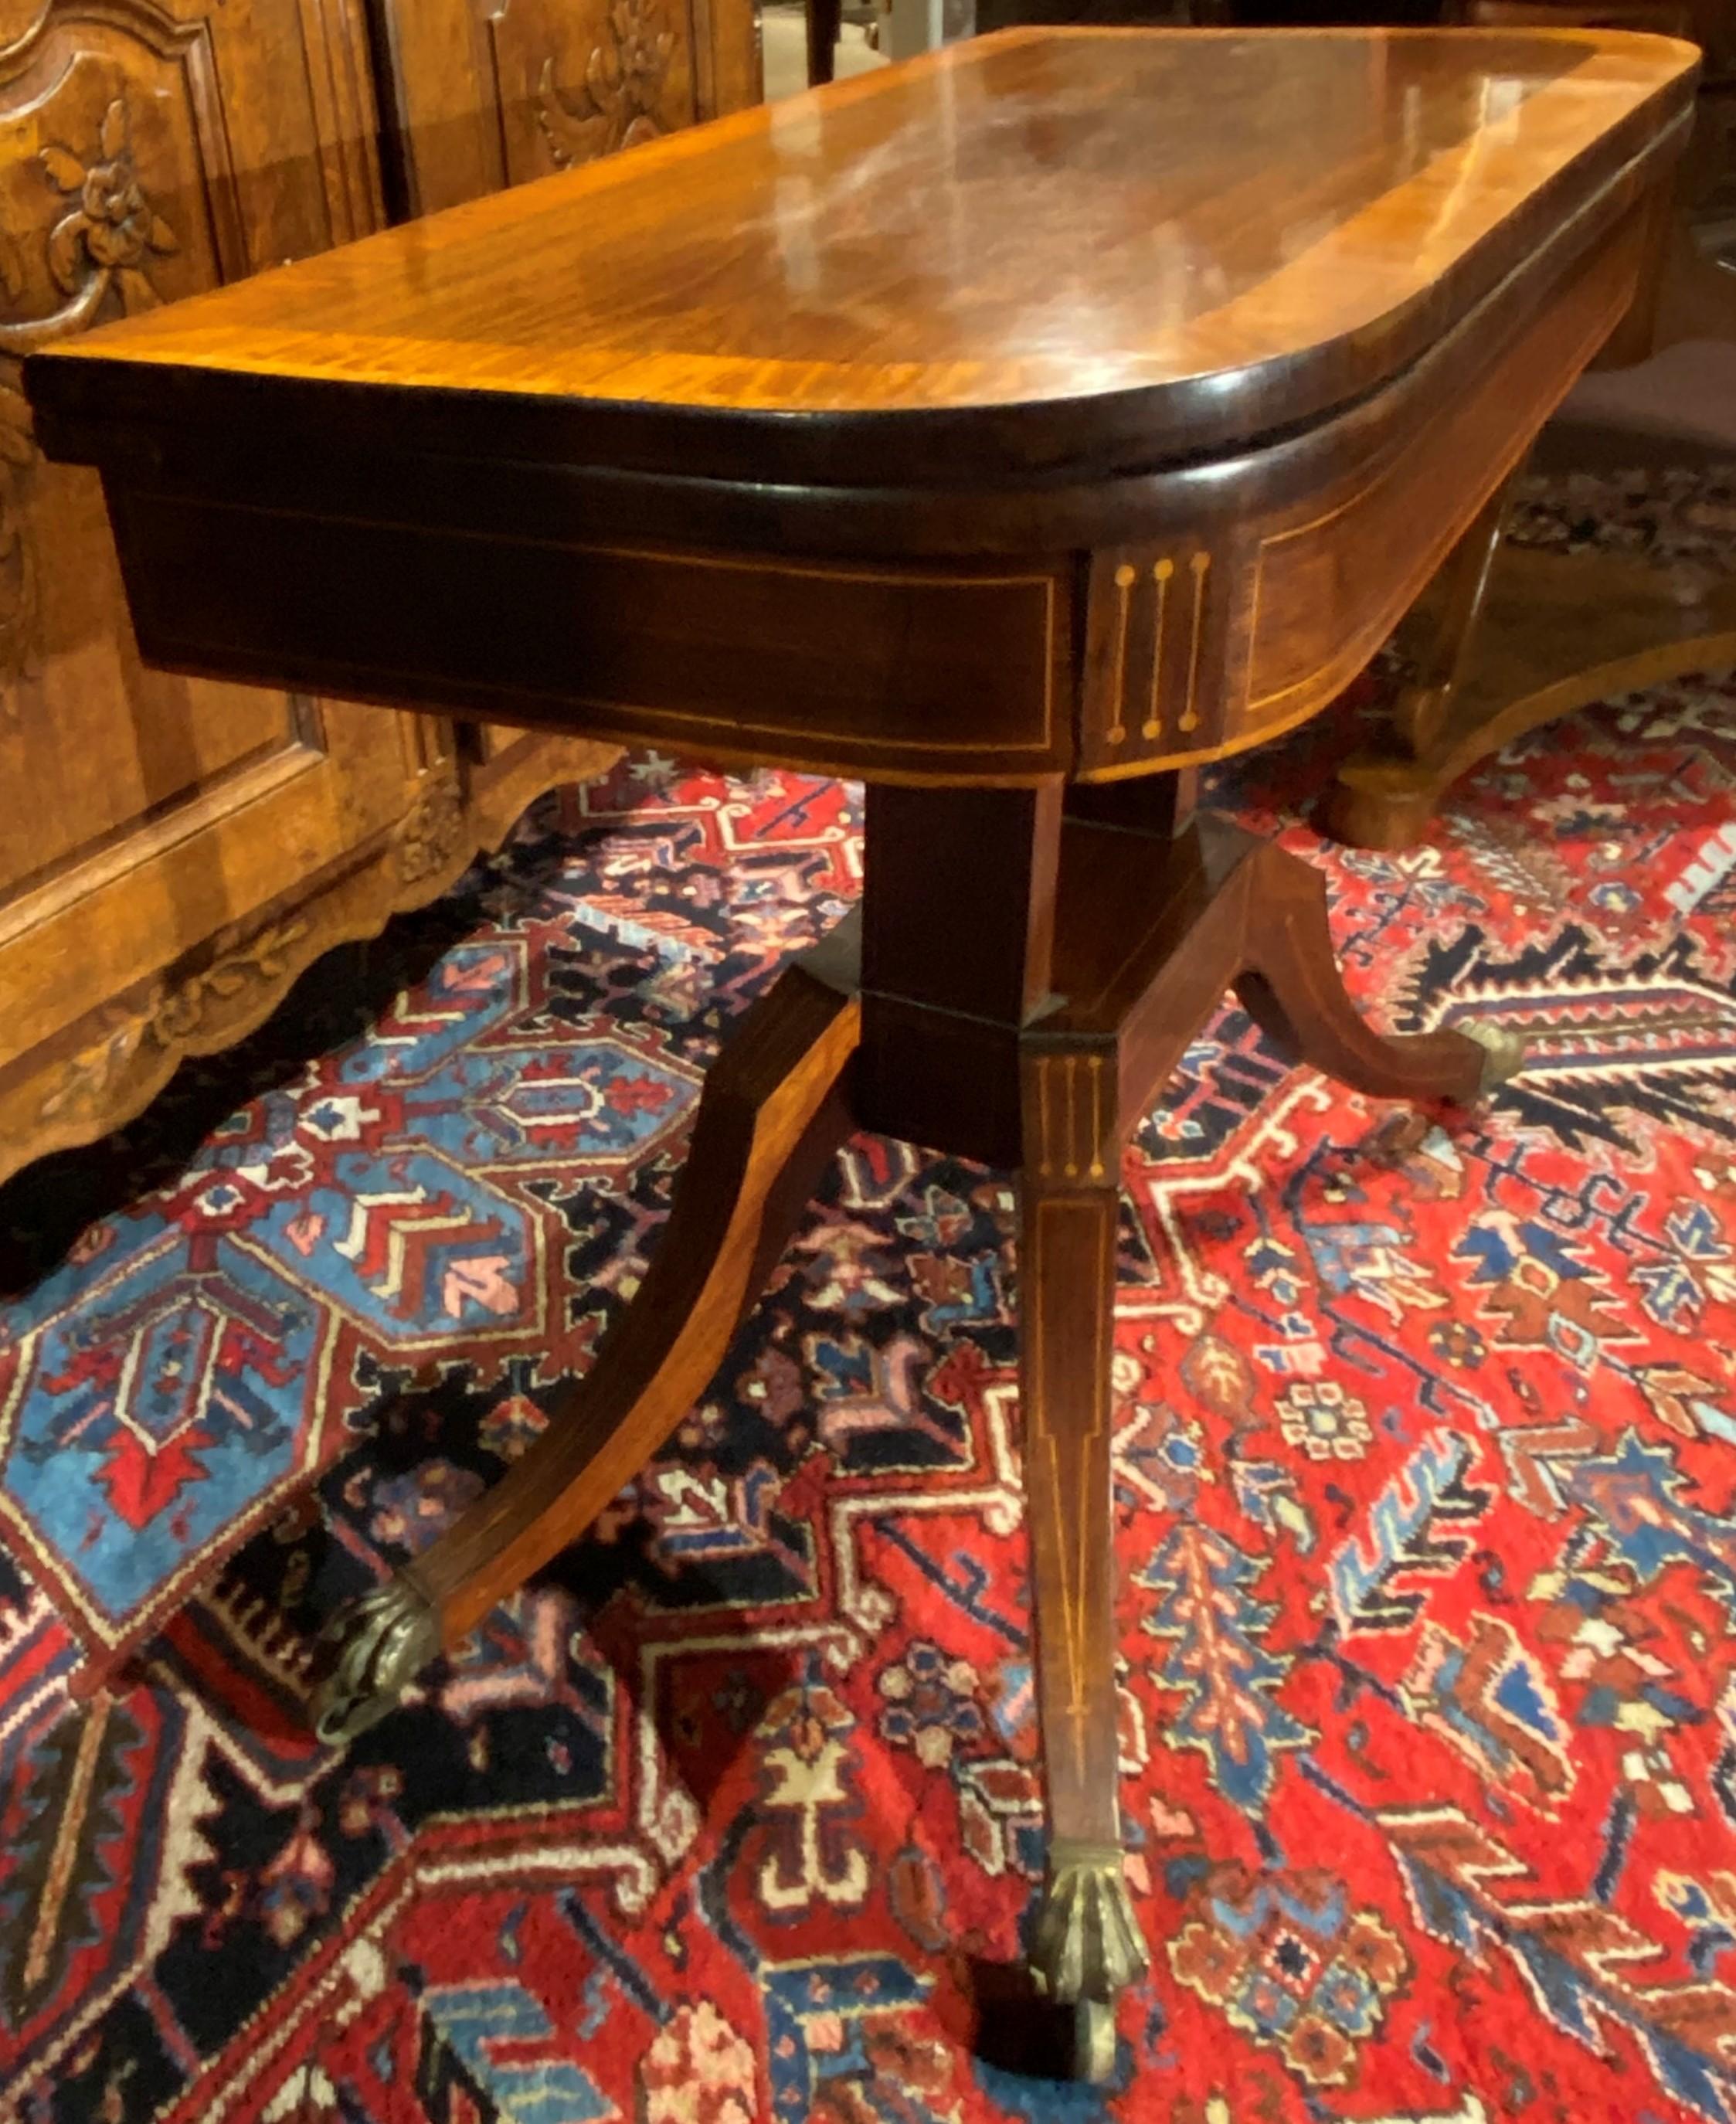 A nicely carved Regency gaming table in rosewood, with a contrasting inlaid top border, opening to a lavender or purple baize lining the interior top, with a storage compartment underneath, all supported by two rectangular pedestals with line inlay